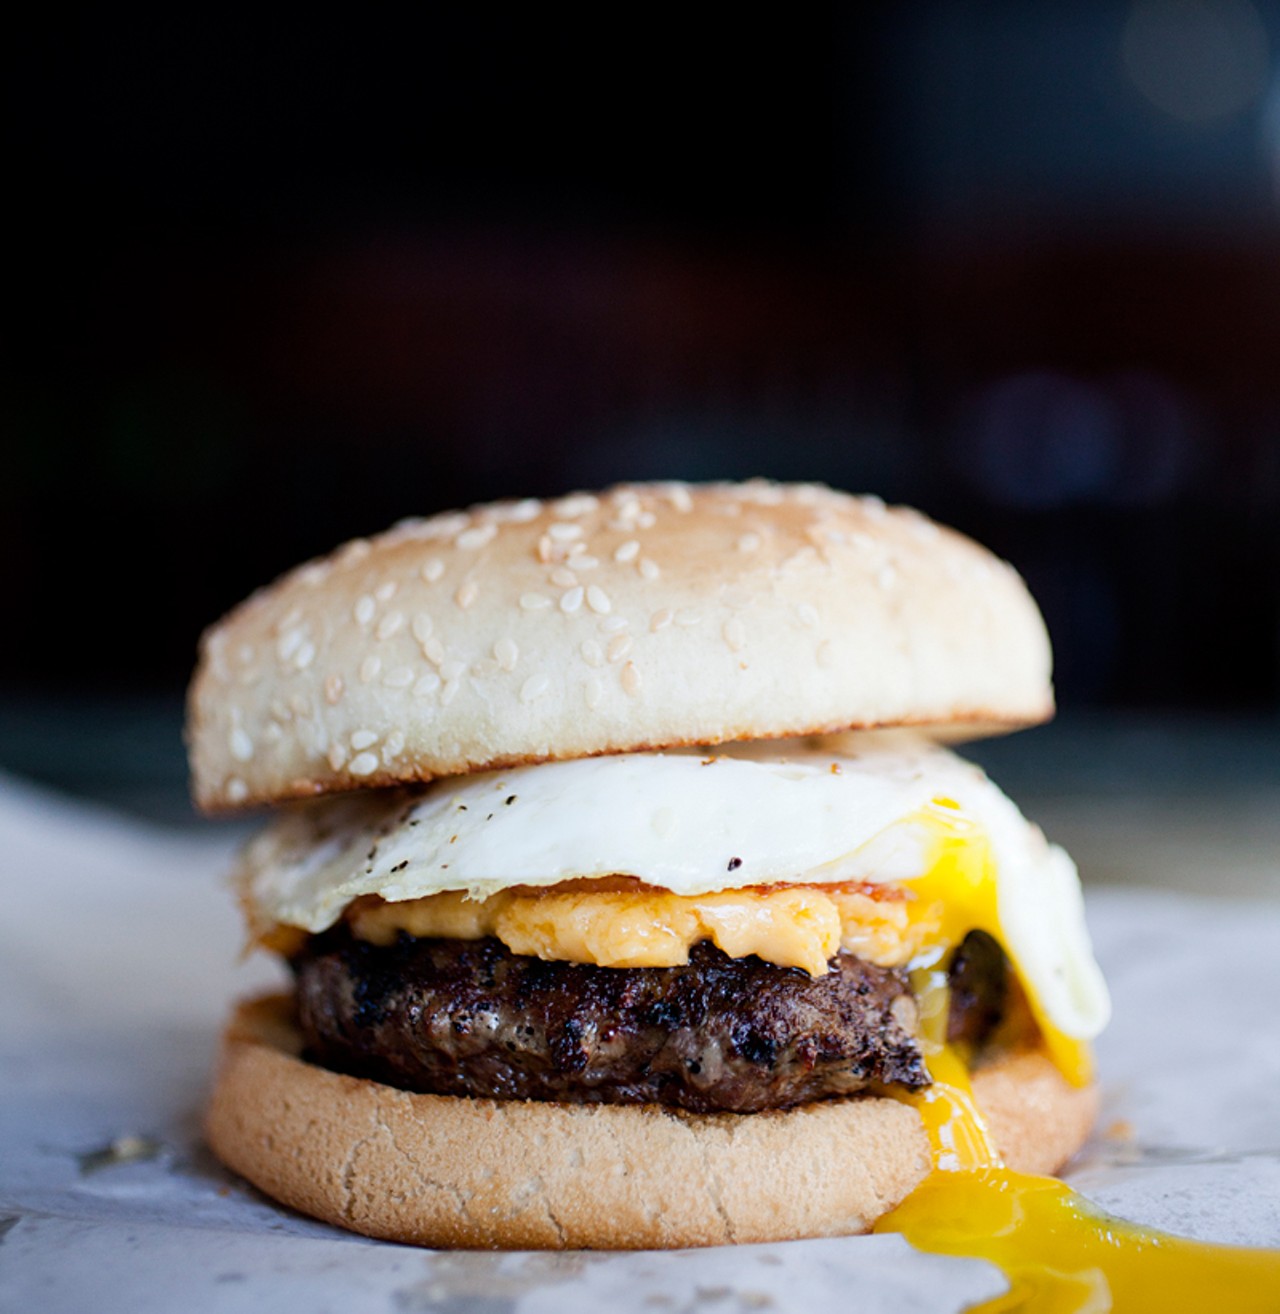 The Hooligan: A Dooley burger with fried bacon, an over-easy egg and a cheddar on a sesame-seed bun.